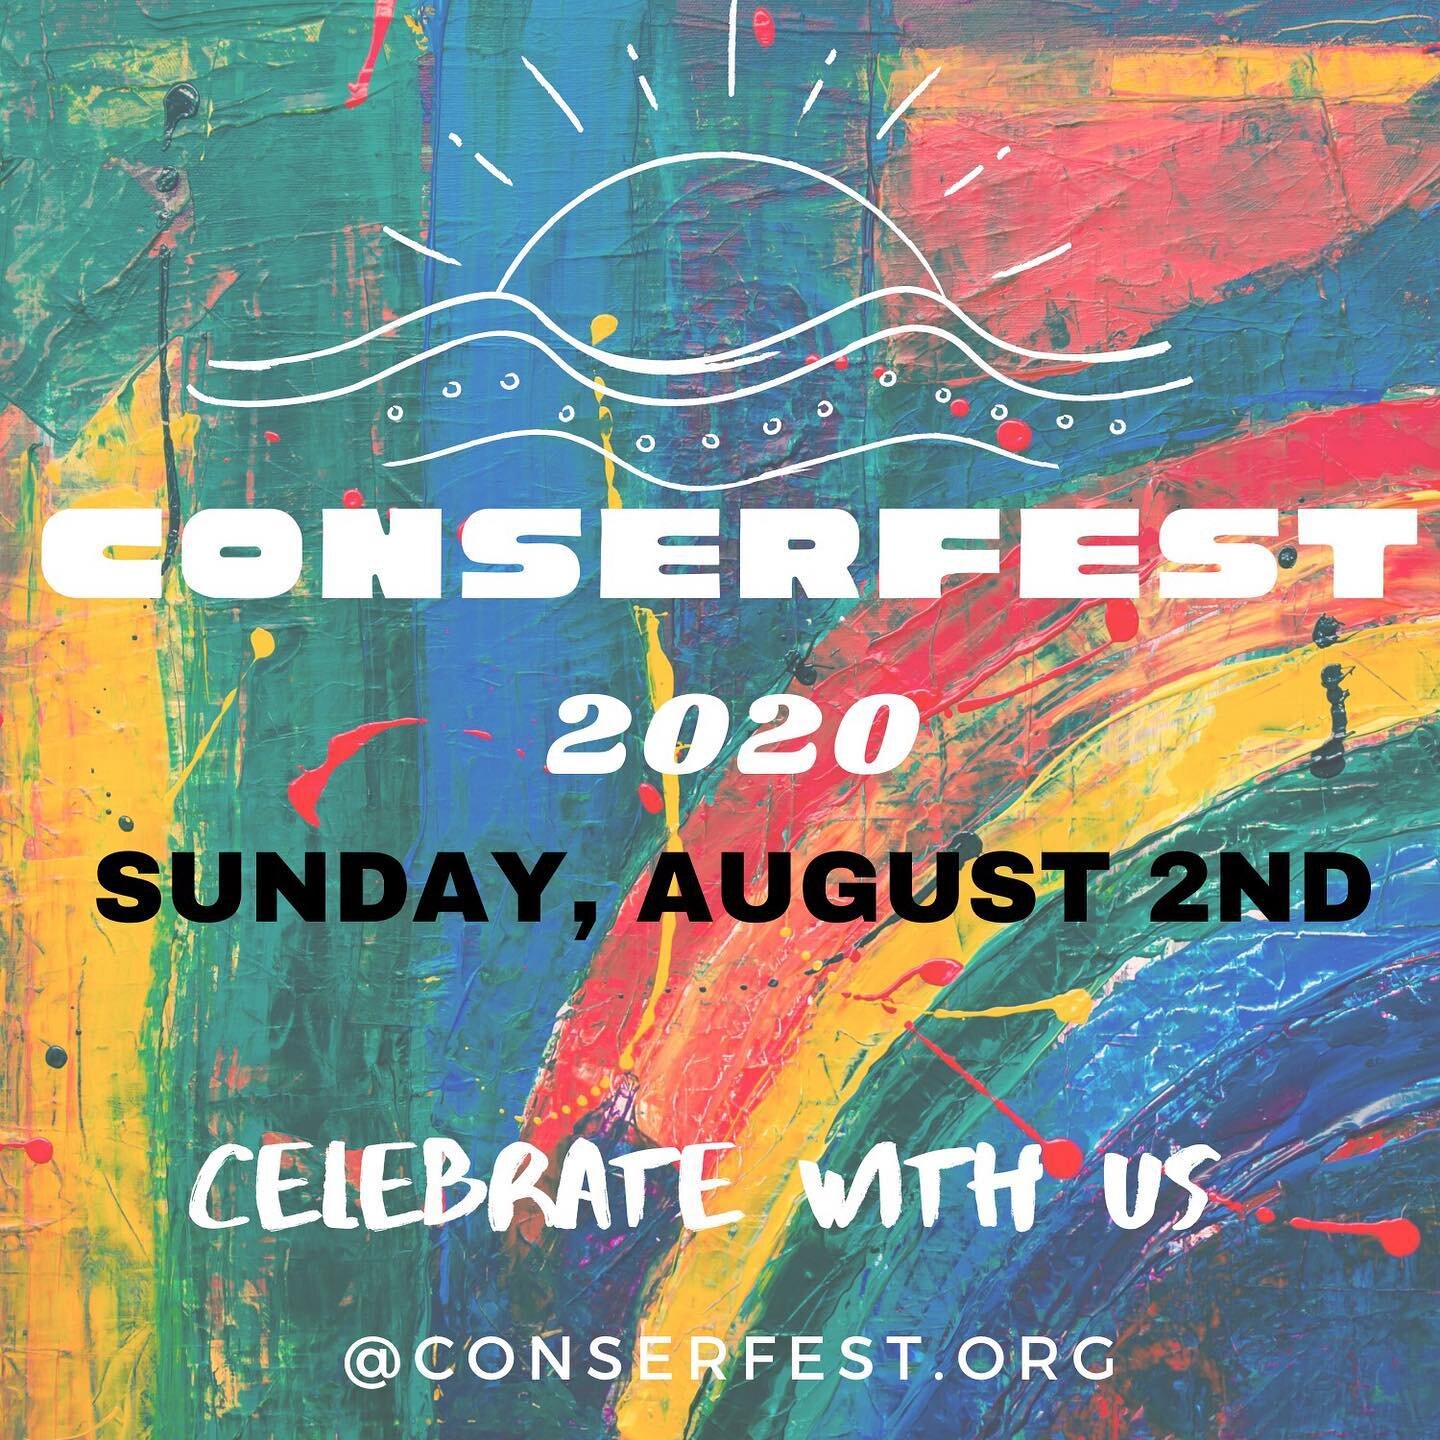 See you all at conserfest.org on 8/2!